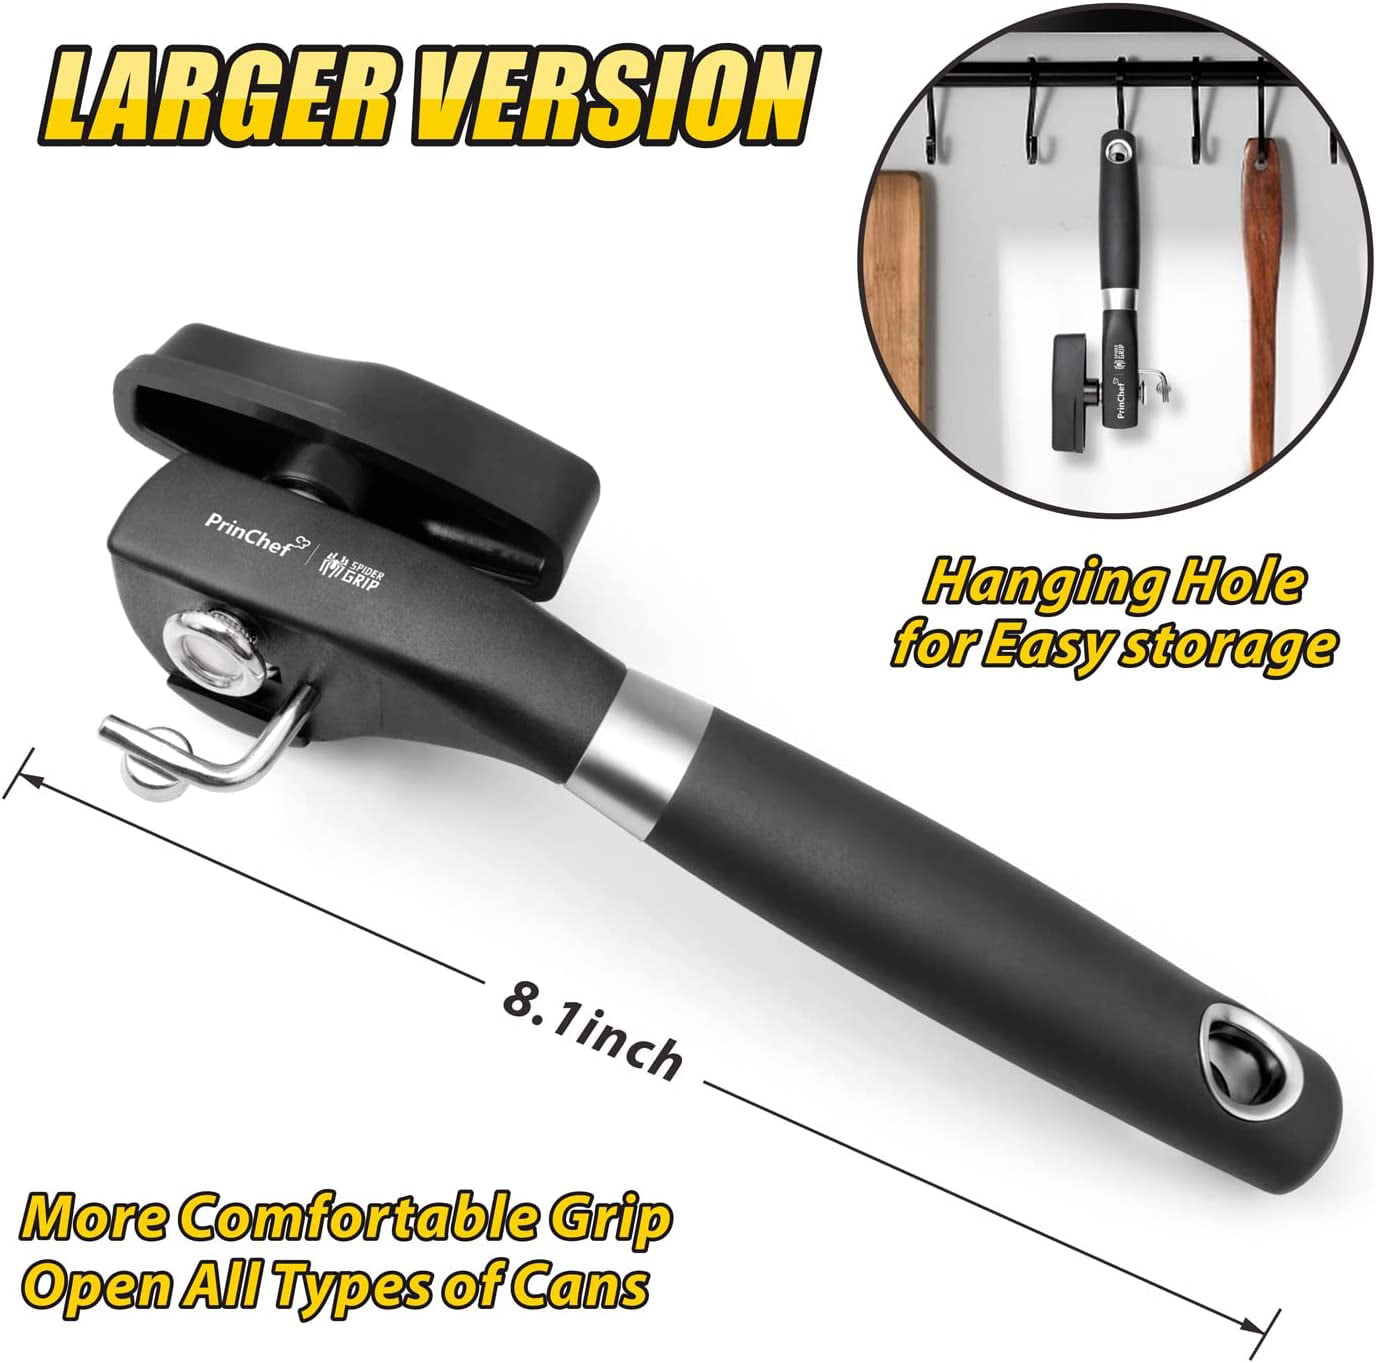 Professional Ergonomic Manual Can Opener WALFOS Stainless Steel Side Cut Can  Openers Opter 210319 From Cong09, $8.56